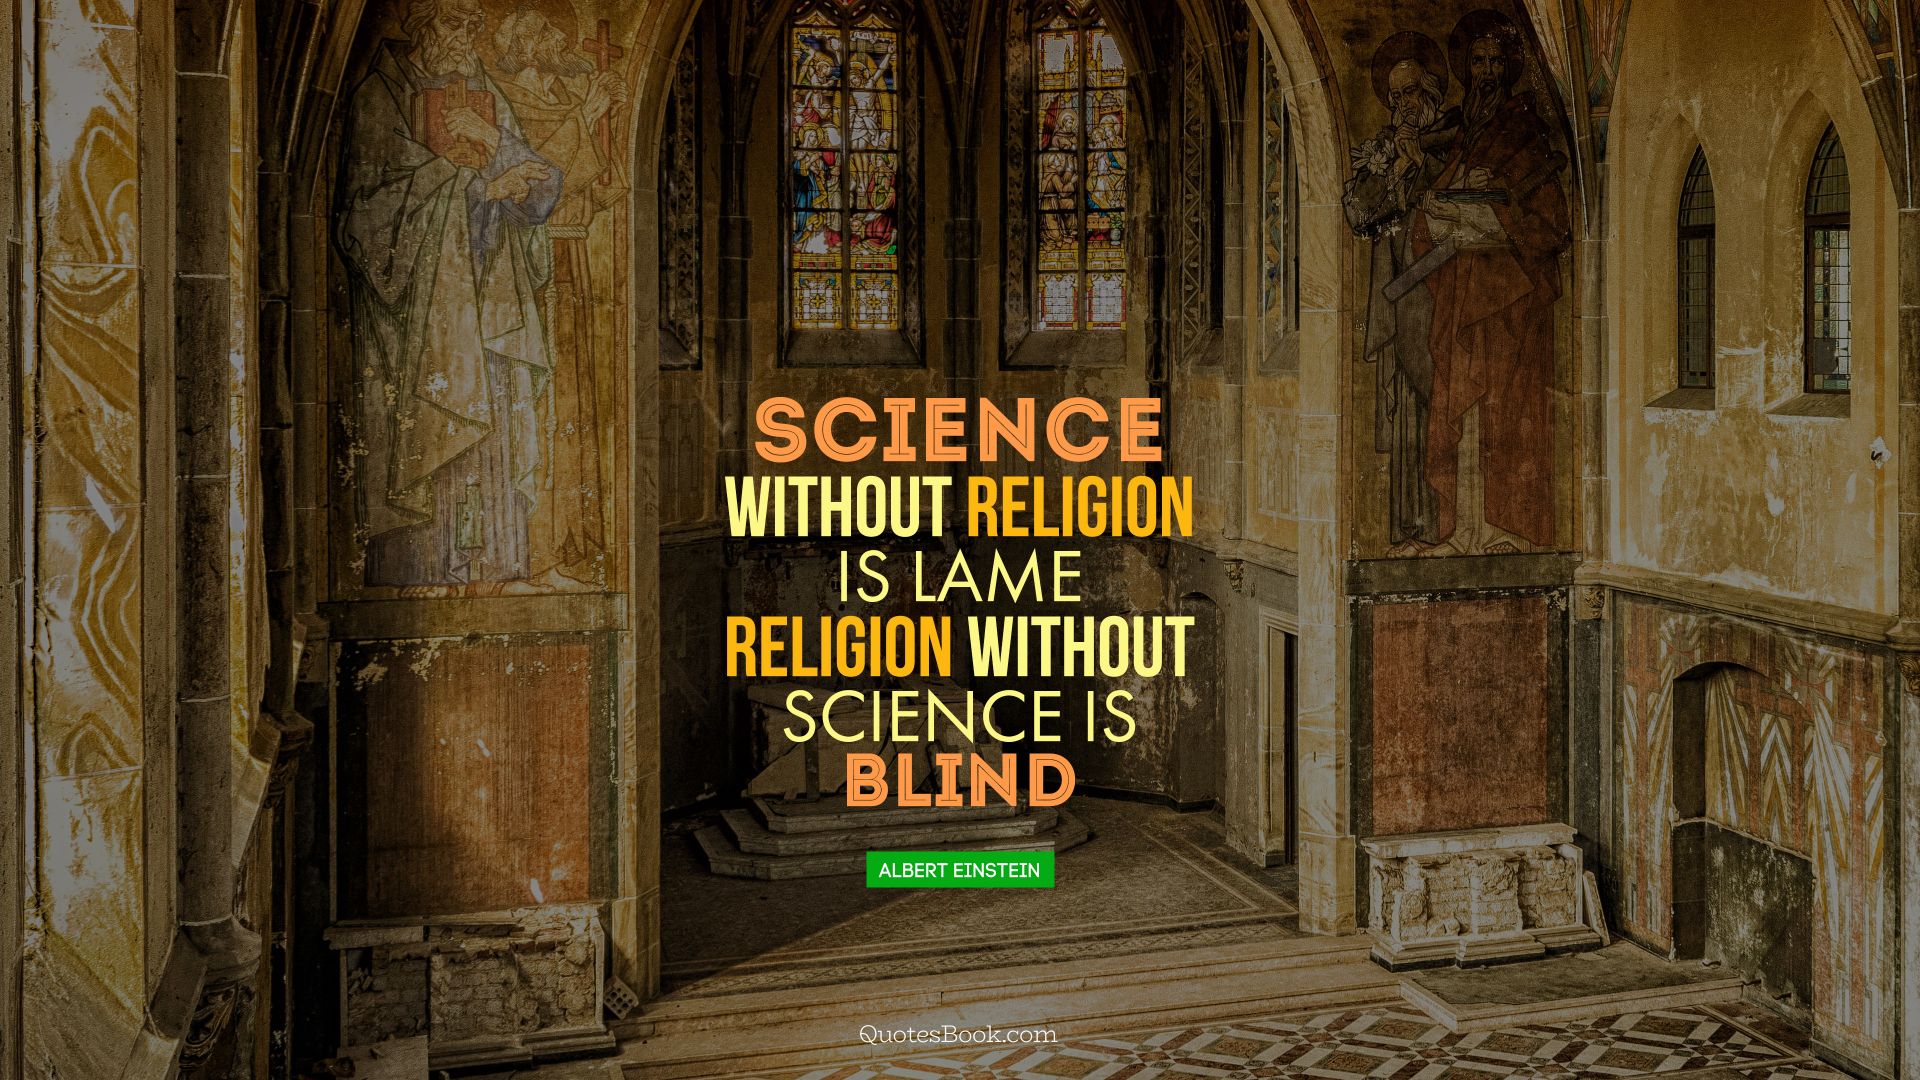 Science without religion is lame religion without science is blind. - Quote by Albert Einstein